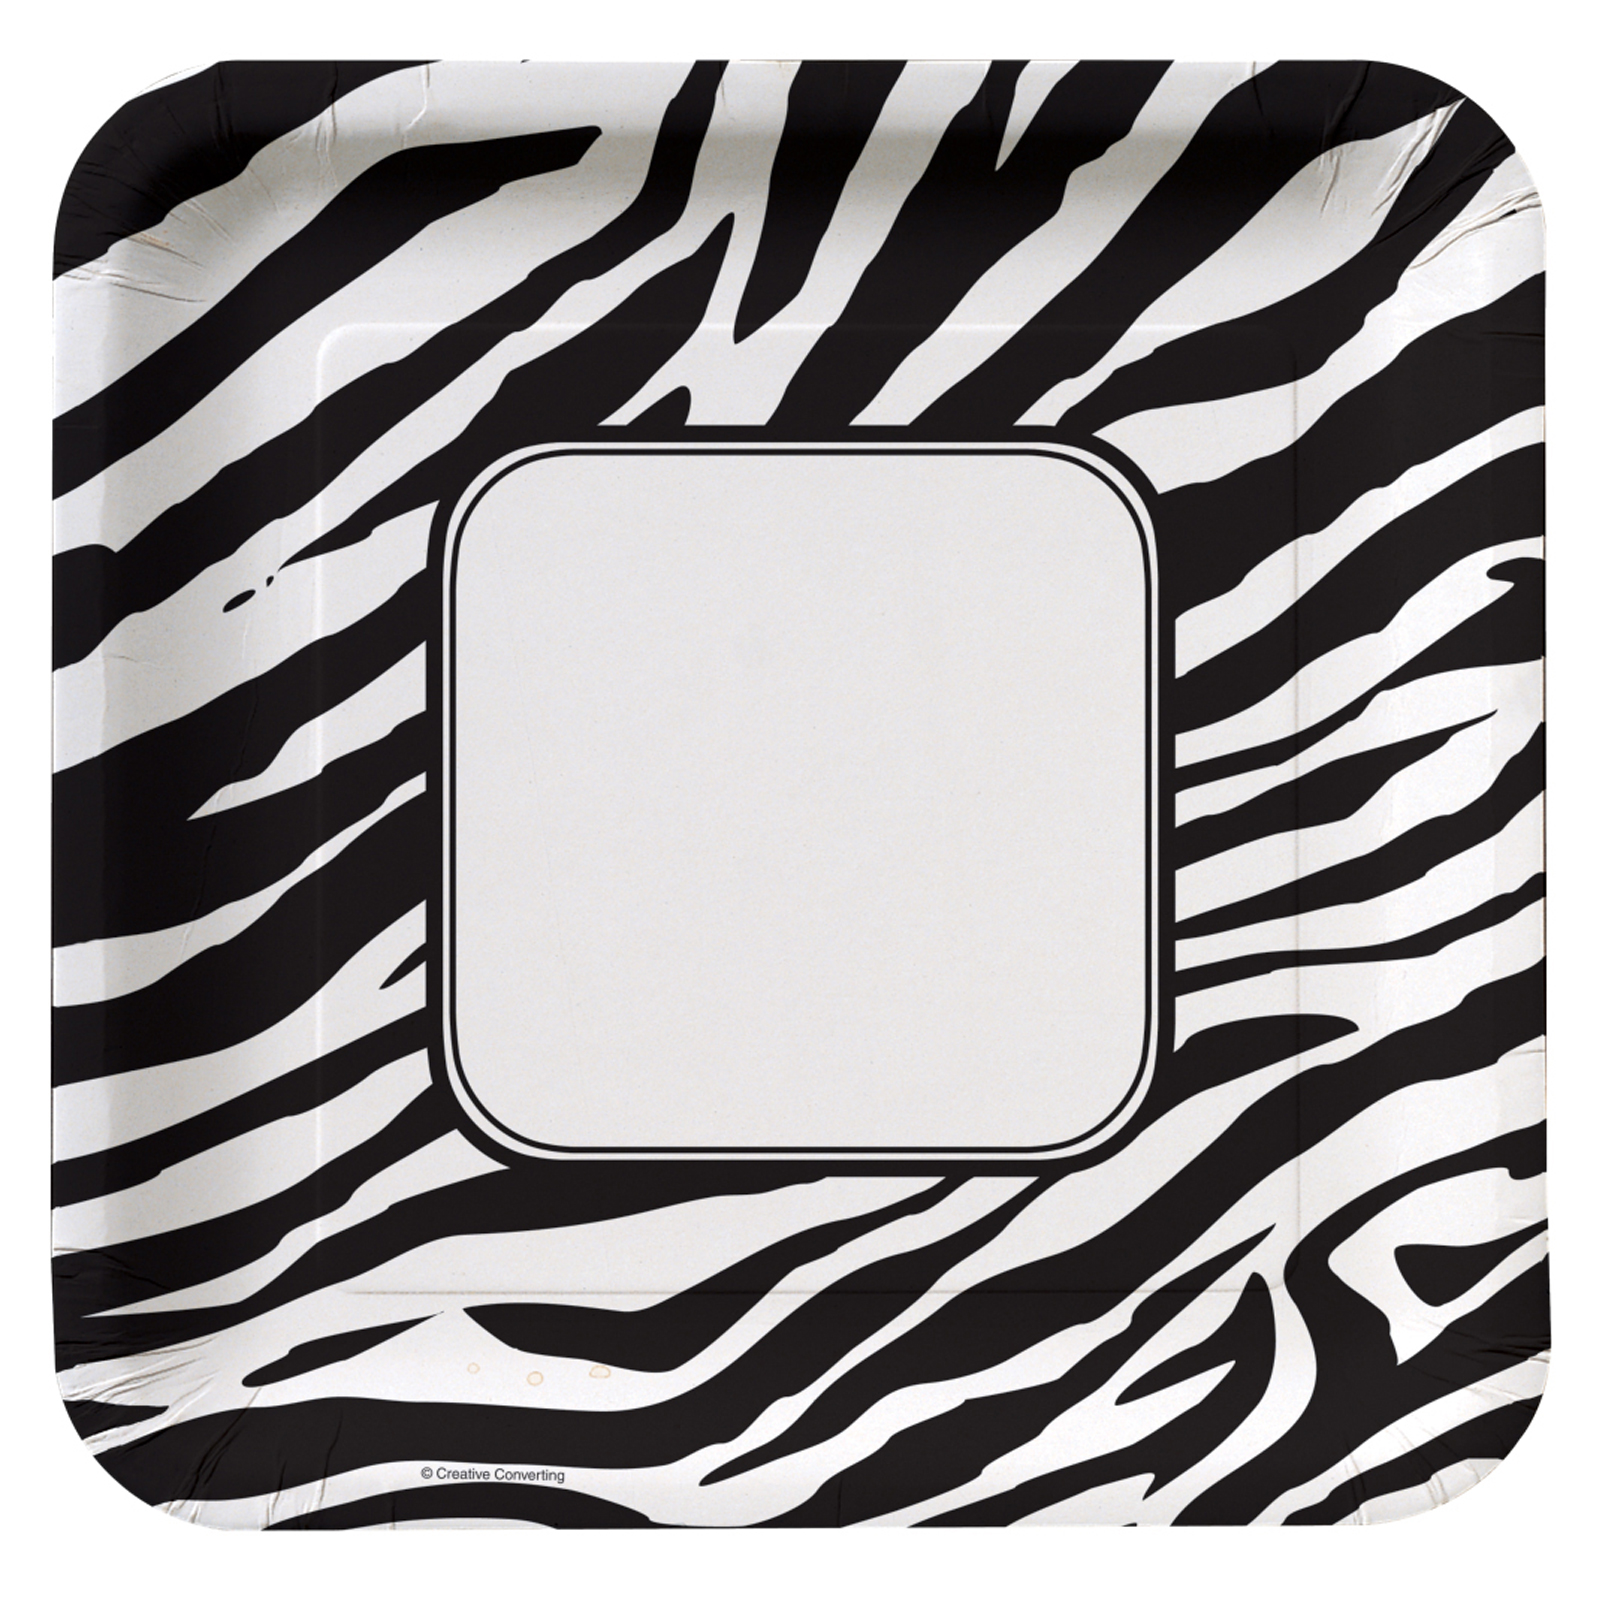 Free Zebra Print Border - Clipart library - Clipart library